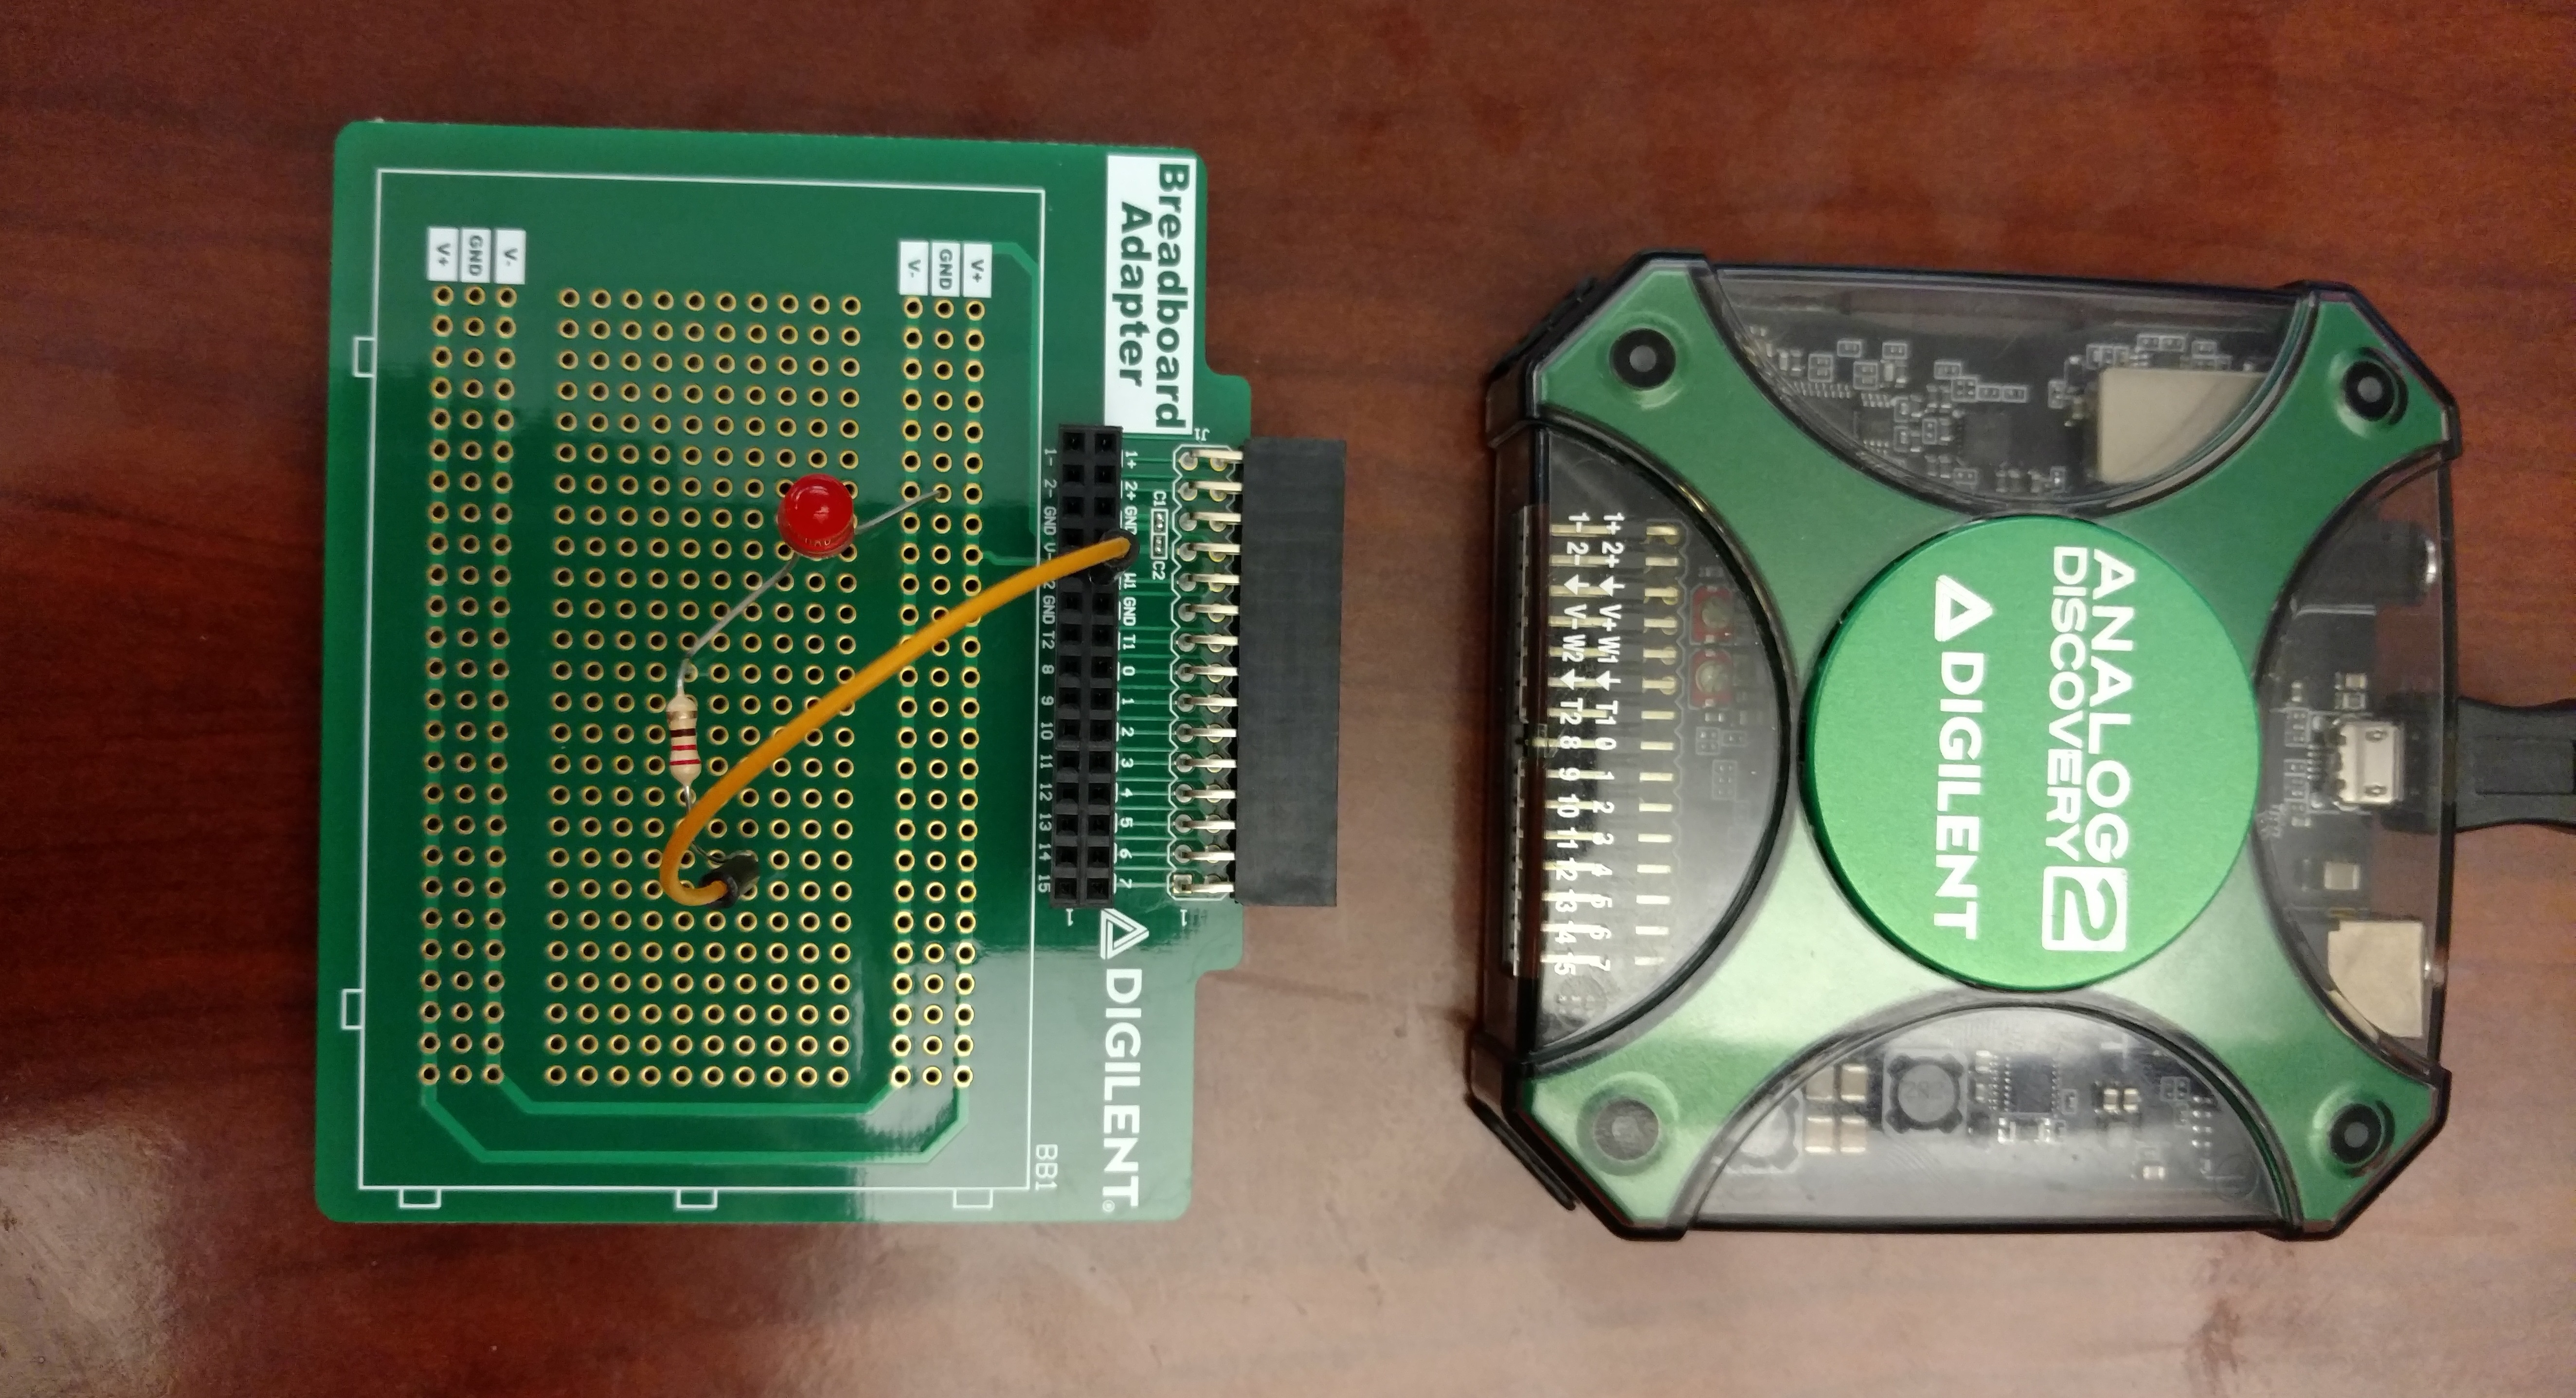 Analog Discovery 2 and BreadBoard Adapter for the Analog Discovery Separated (click to enlarge)